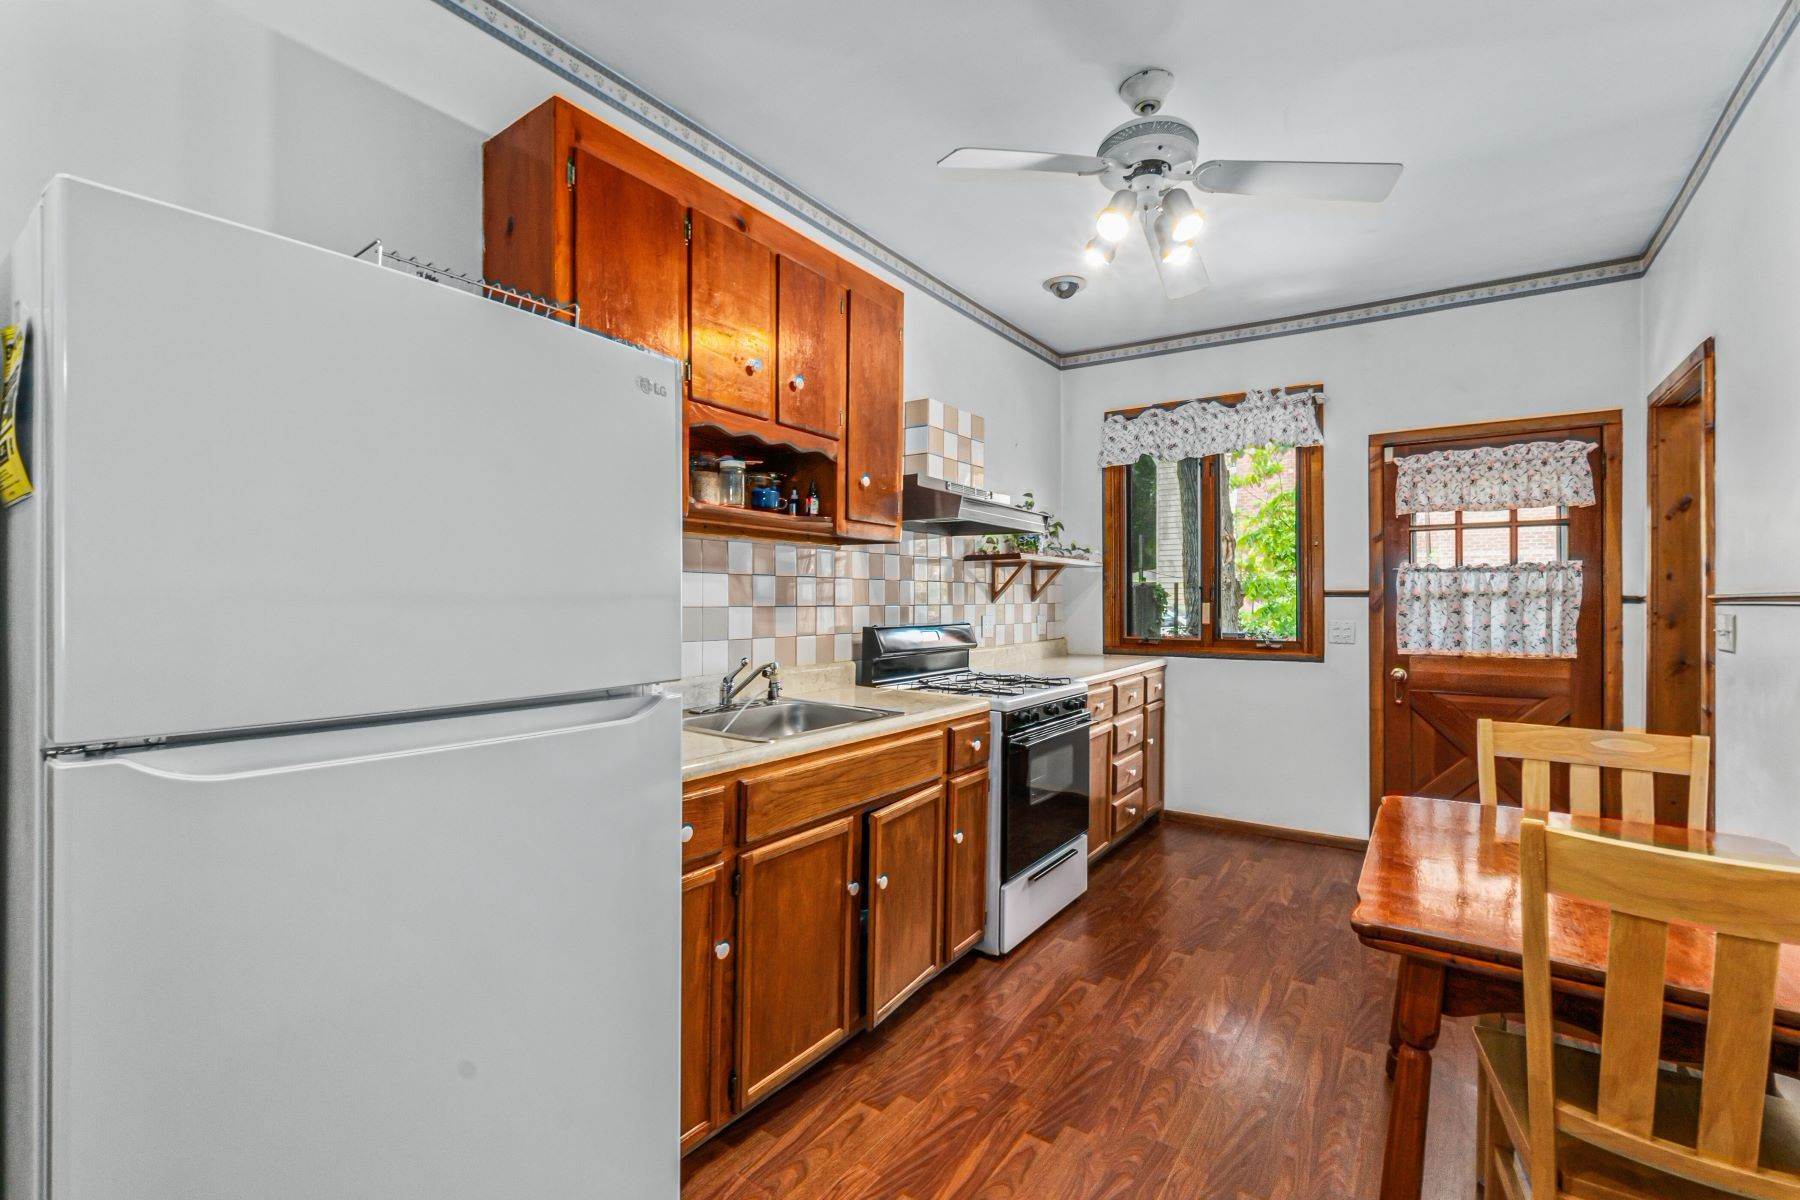 2. Single Family Homes for Sale at 23-32 Sound Street, Astoria, NY, 11105 23-32 Sound Street Astoria, New York 11105 United States